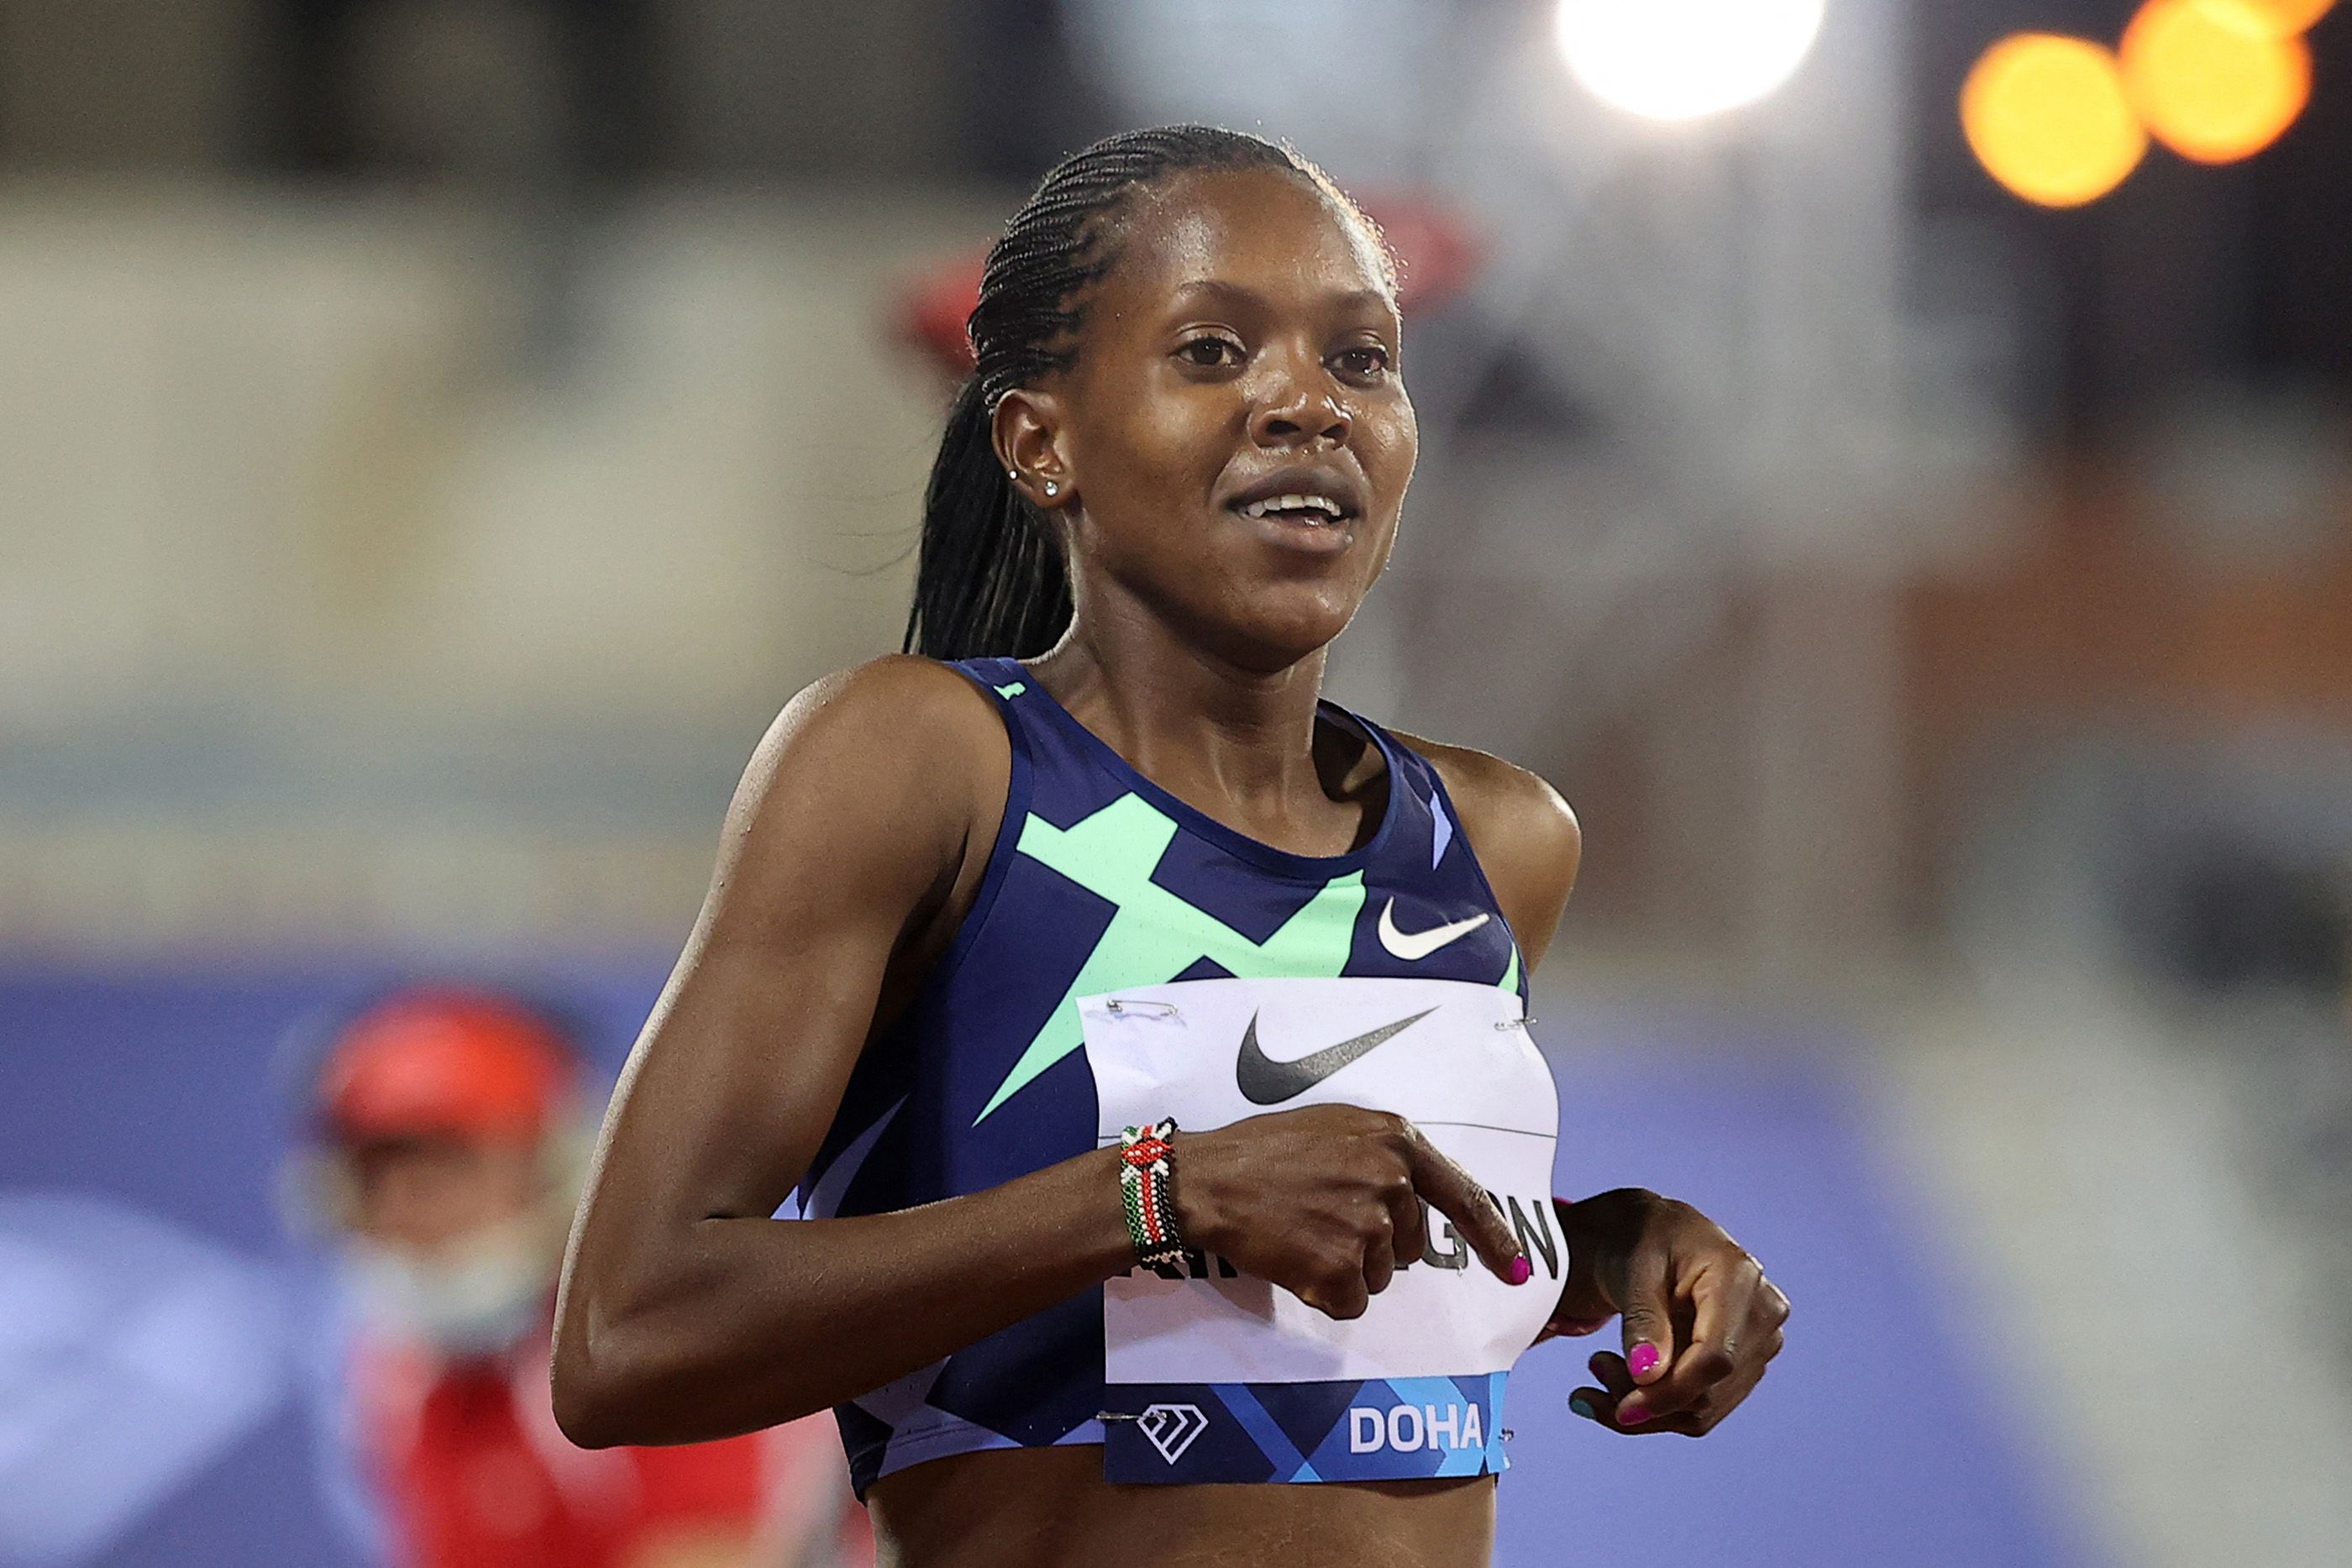 Faith Kipyegon in action at the Diamond League meeting in Doha